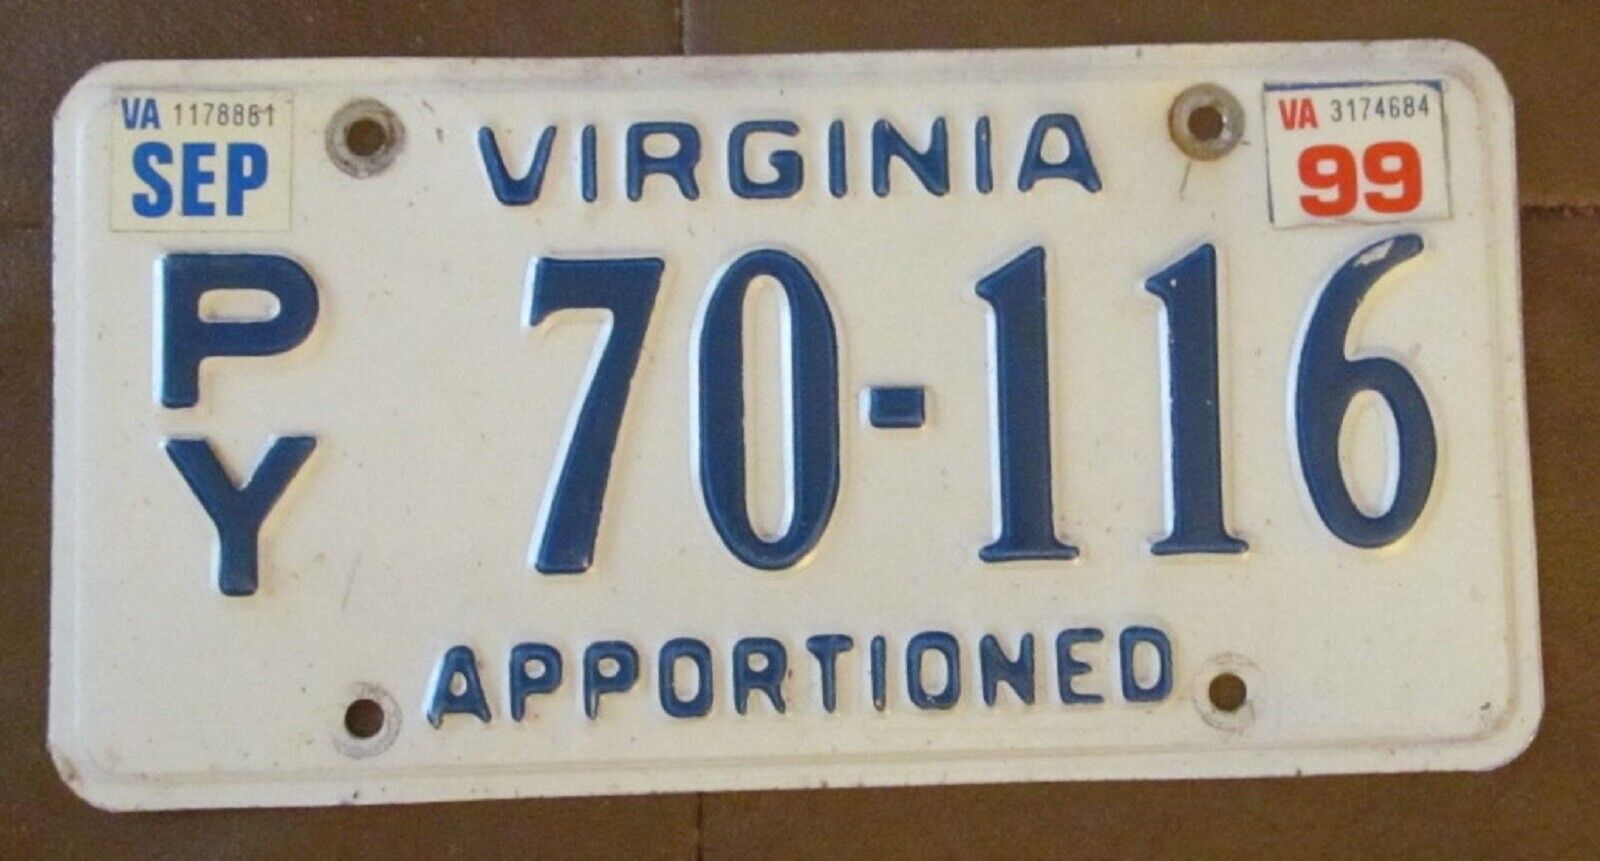 Virginia 1999 APPORTIONED NICE QUALITY License Plate # PY 70-116